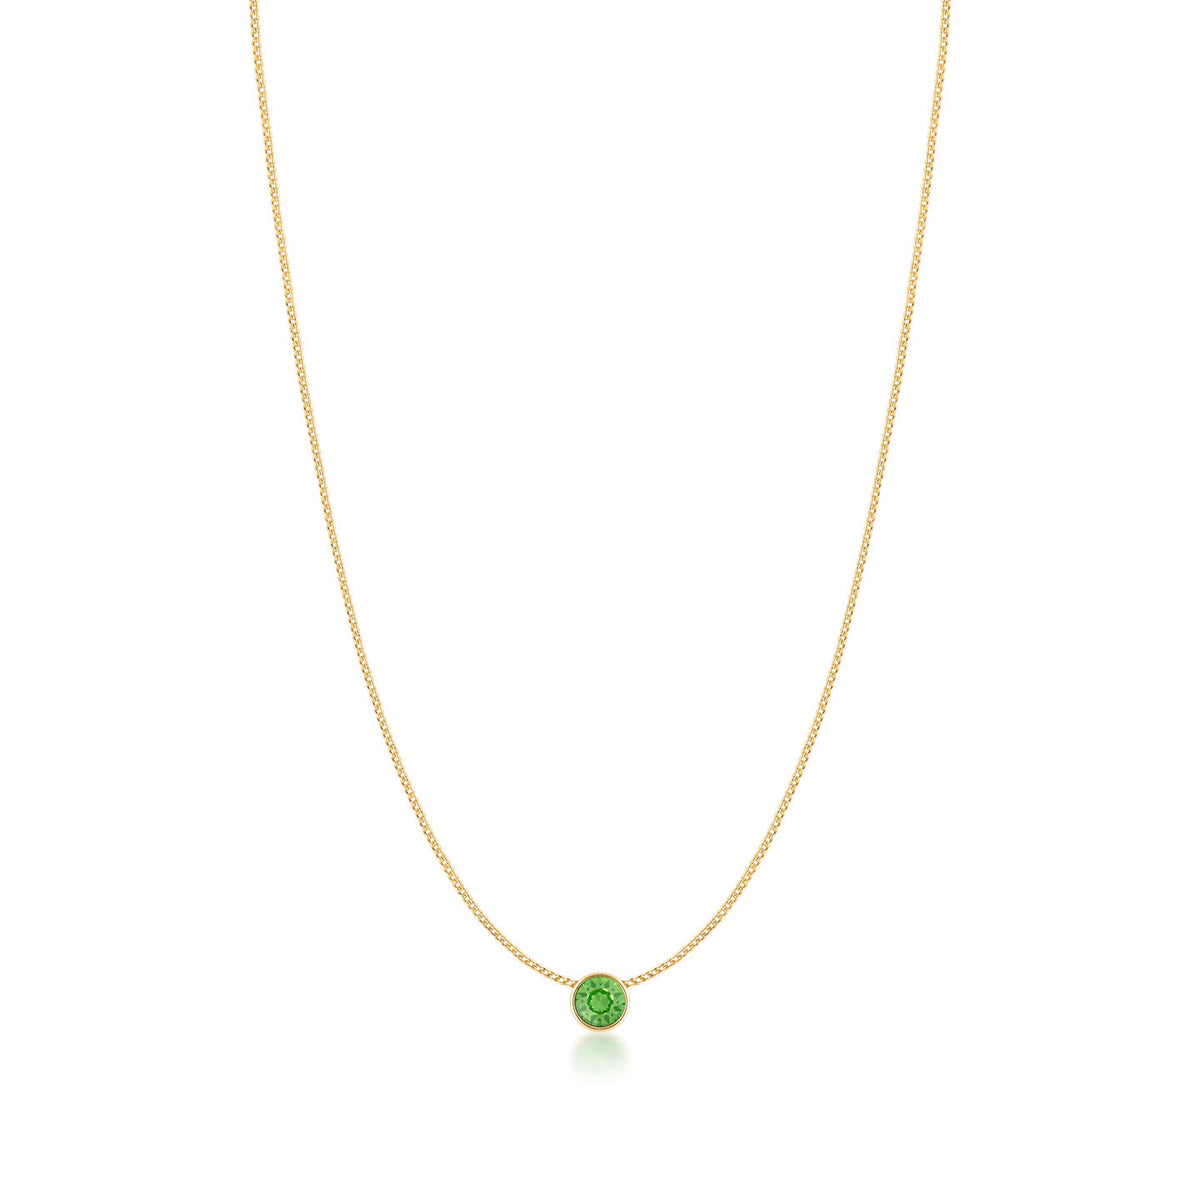 Harley Small Pendant Necklace with Green Peridot Round Crystals from Swarovski Gold Plated - Ed Heart